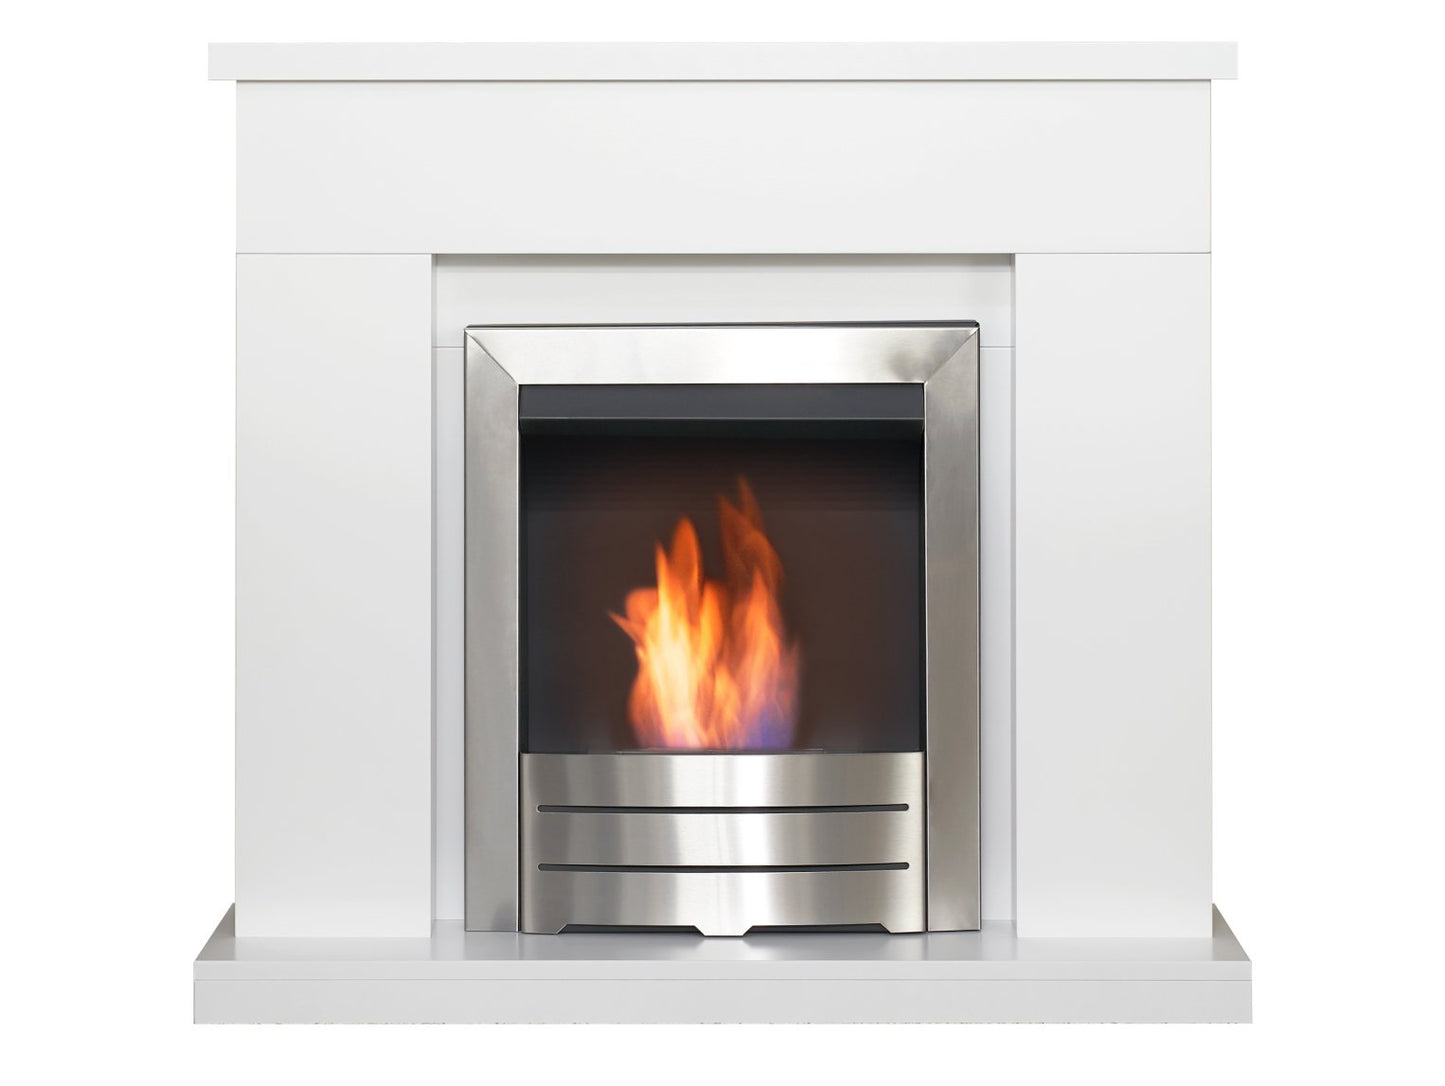 Adam Lomond Fireplace Suite in Pure White with Colorado Bio Ethanol Fire in Brushed Steel, 39 Inch